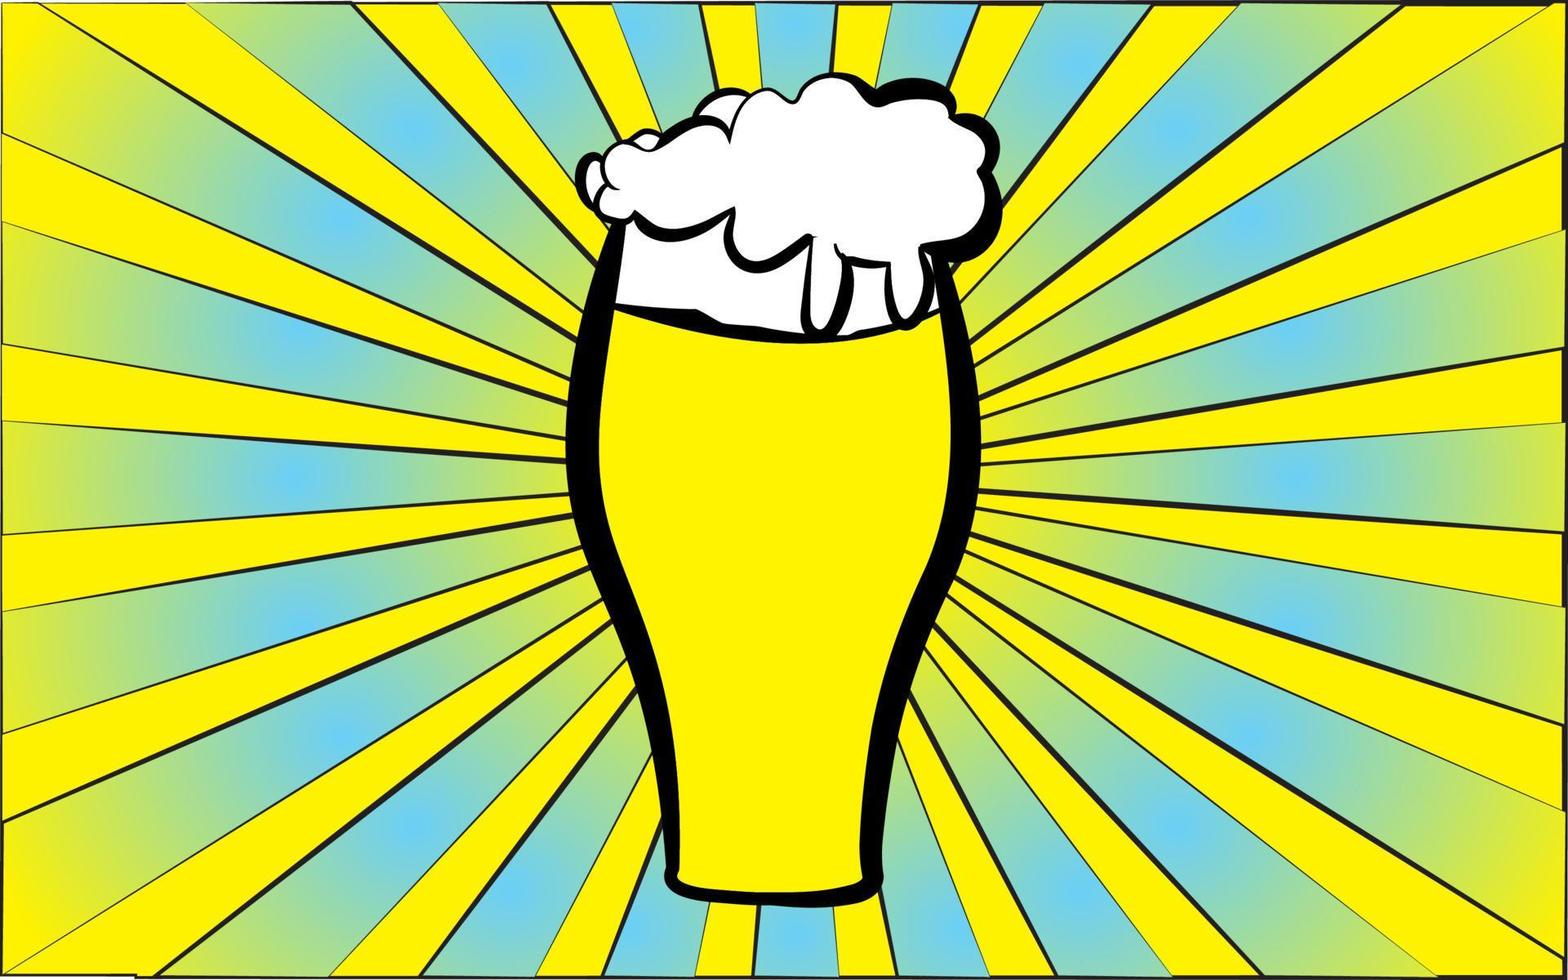 A glass of delicious foamy light beer on a background of abstract yellow rays. Vector illustration